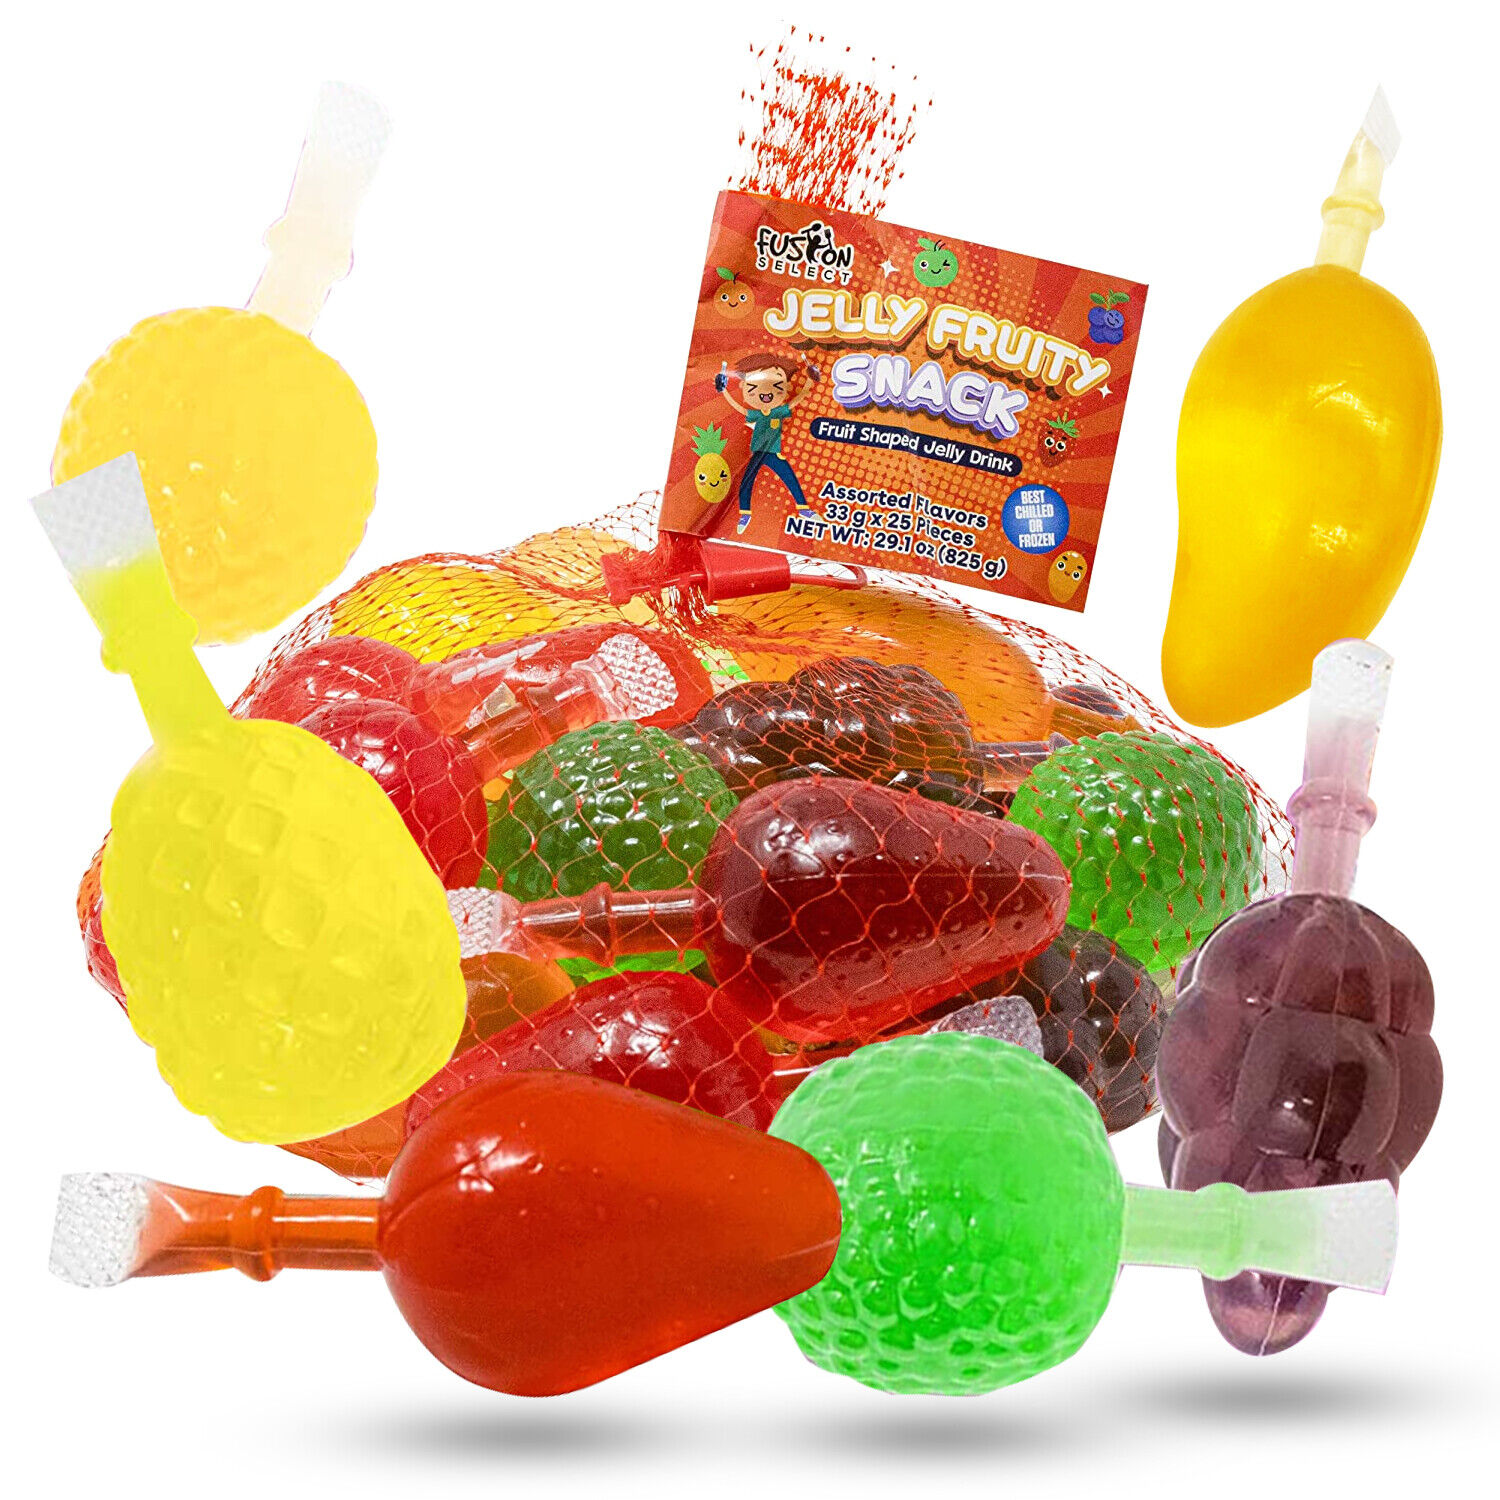 Jelly fruits